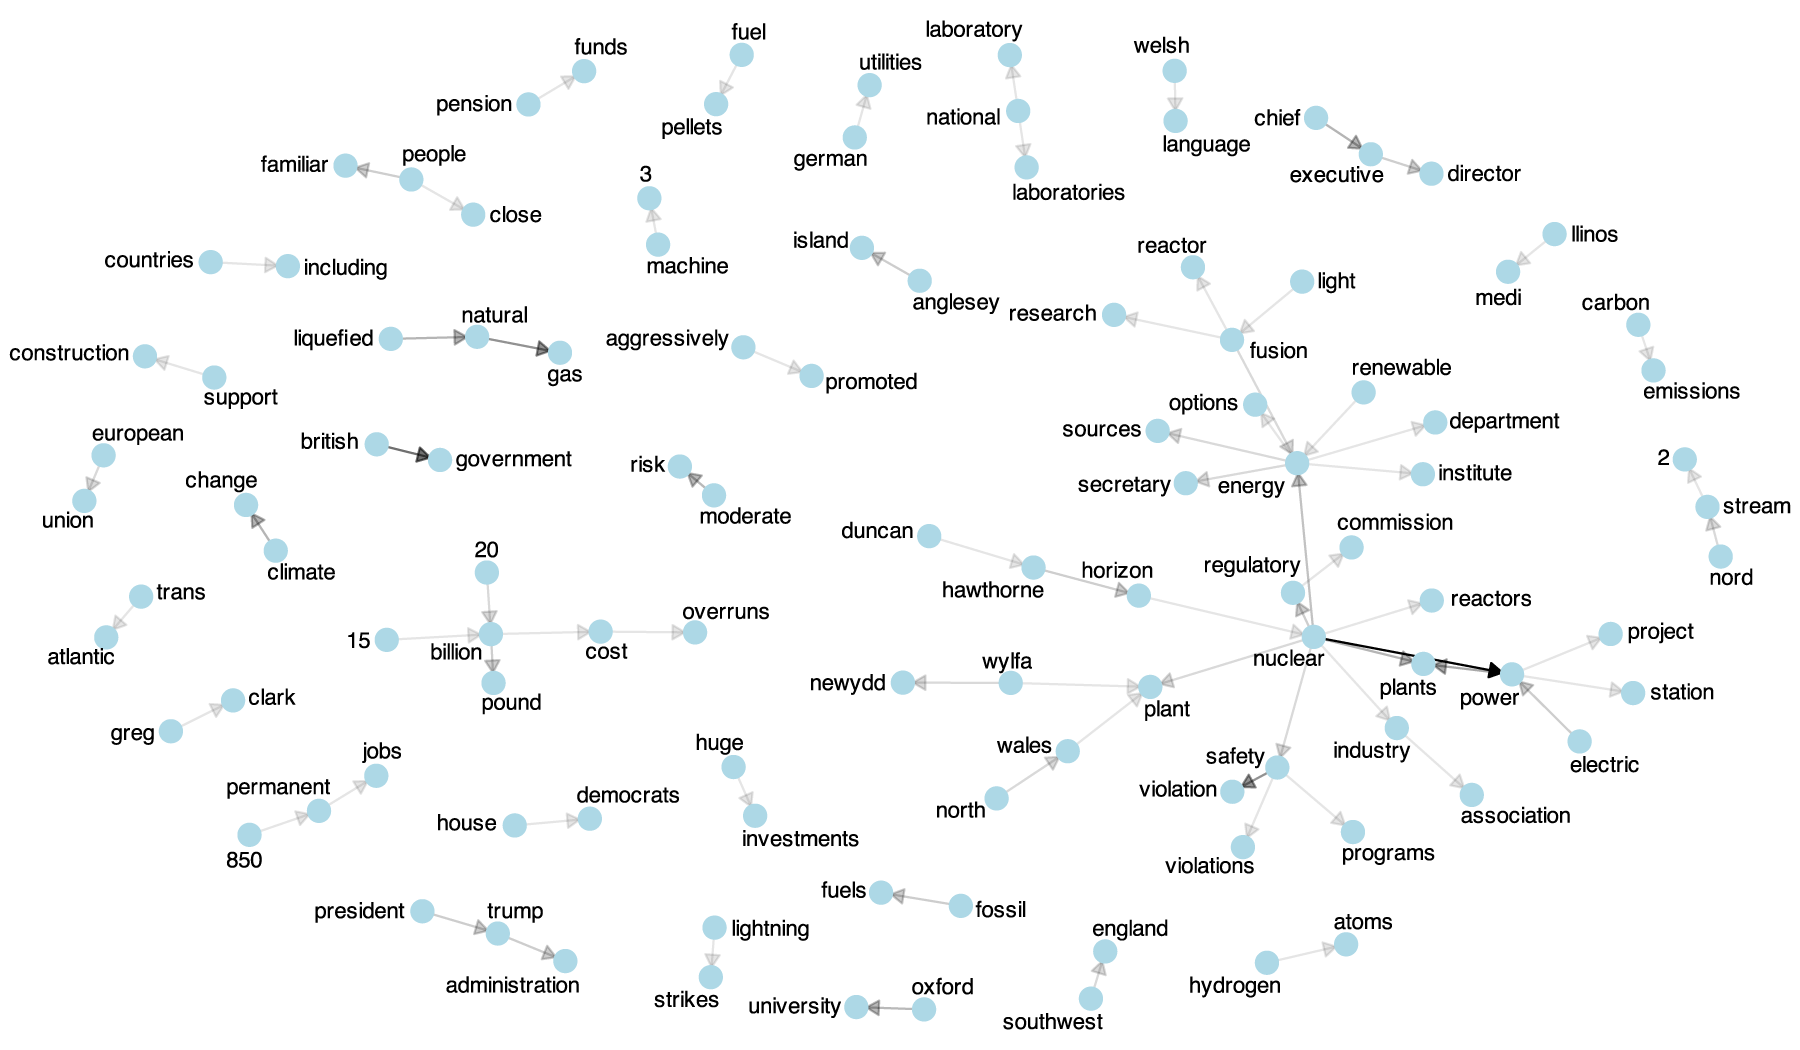 Network map of topics discussed in the news media in 2019